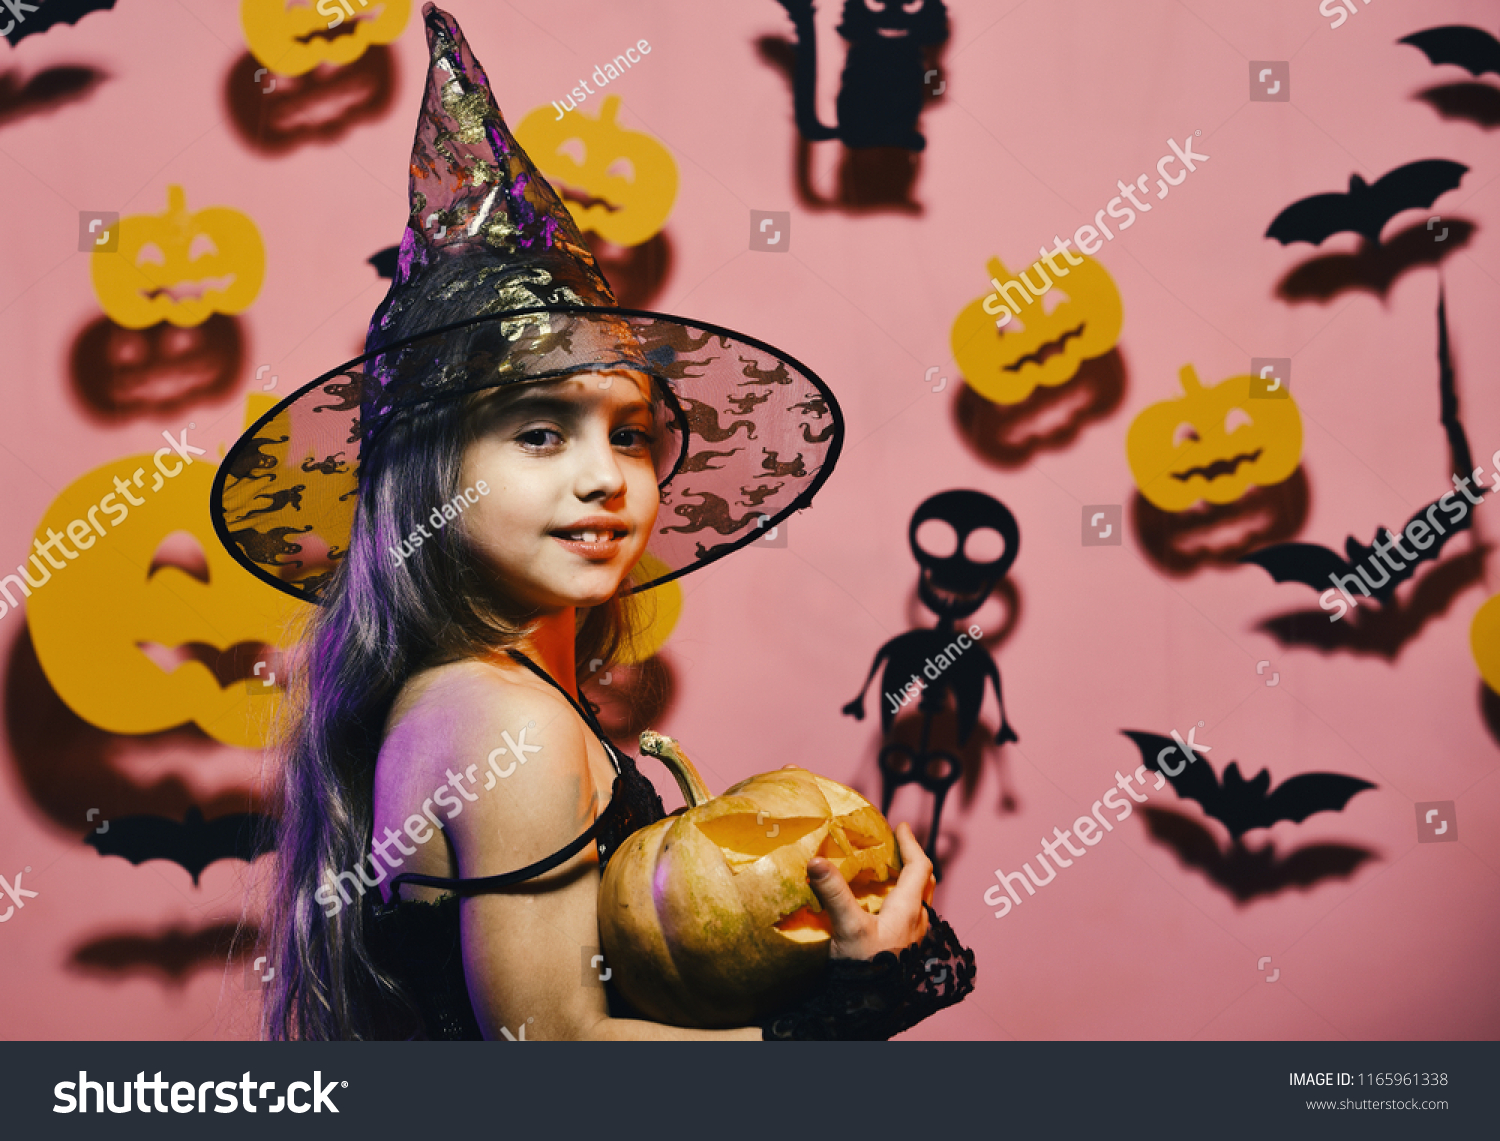 Little witch wearing black hat. Halloween party and decorations concept. Girl with smiling face on pink background with bats and pumpkins decor. Kid in spooky witches costume holds carved pumpkin #1165961338